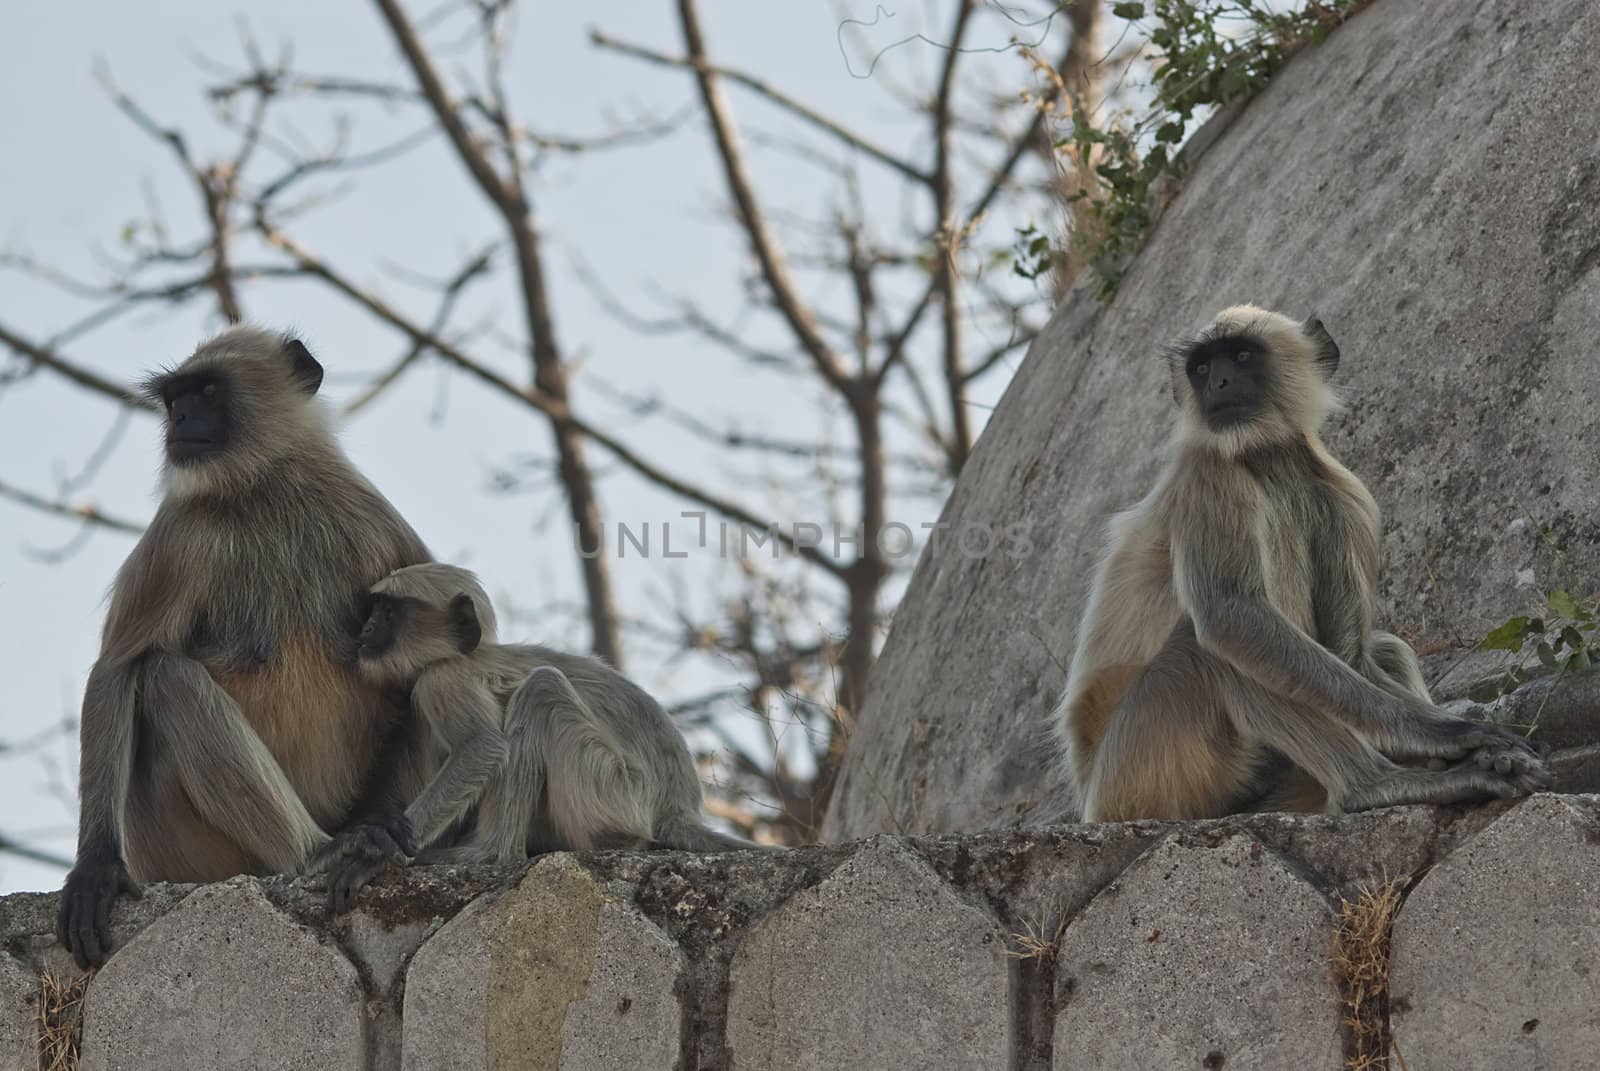 Family of three monkey sitting and looking around